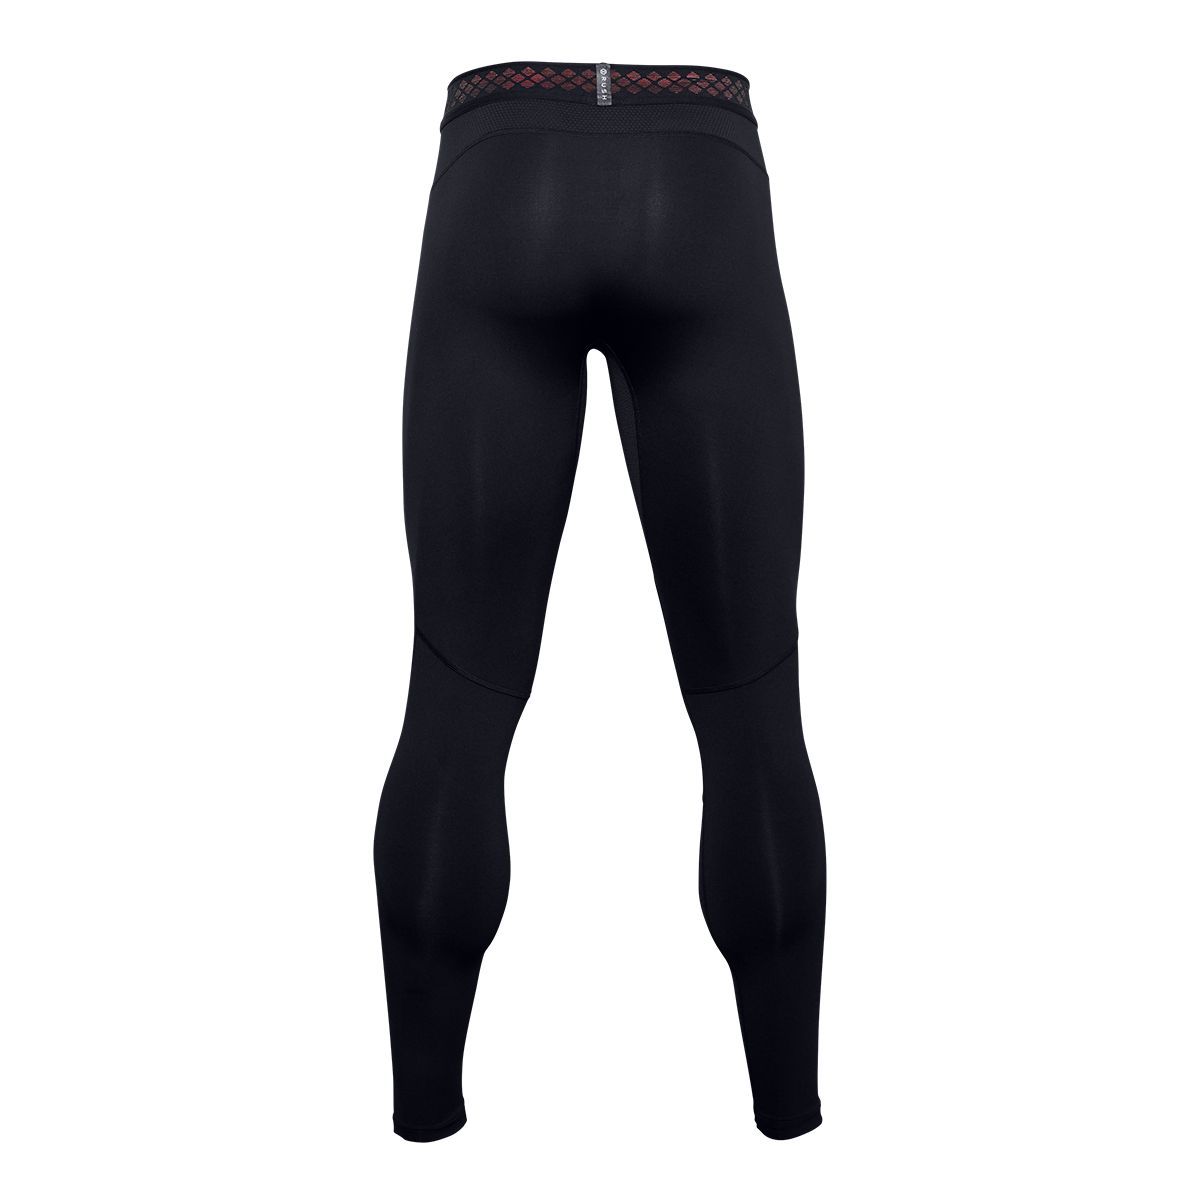 Under Armour Men's Rush 2.0 Tights